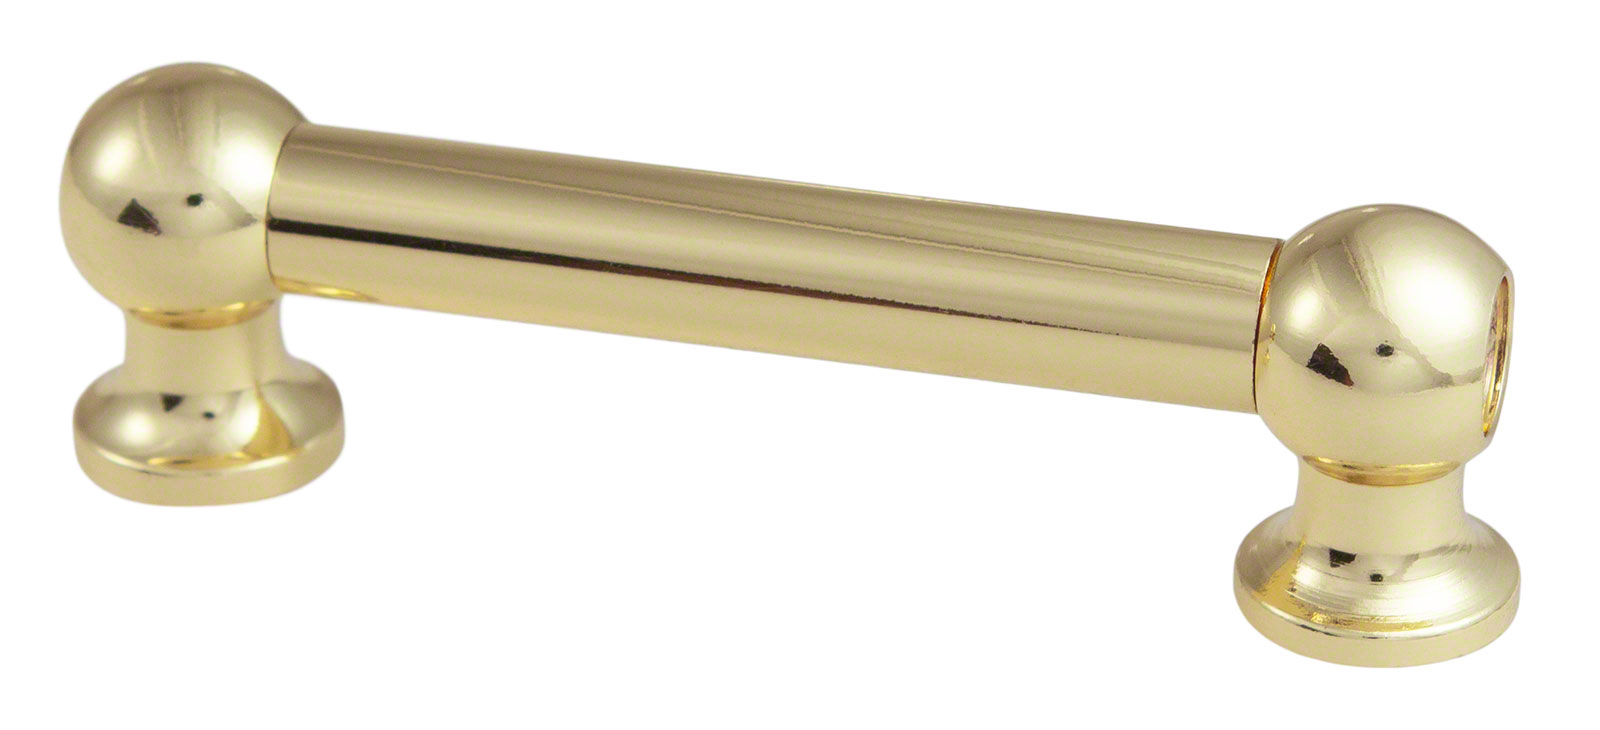 SPAREDRUM TL12D56-BR - TUBE LUG BRASS - 56MM - DOUBLE ENDED (X1)